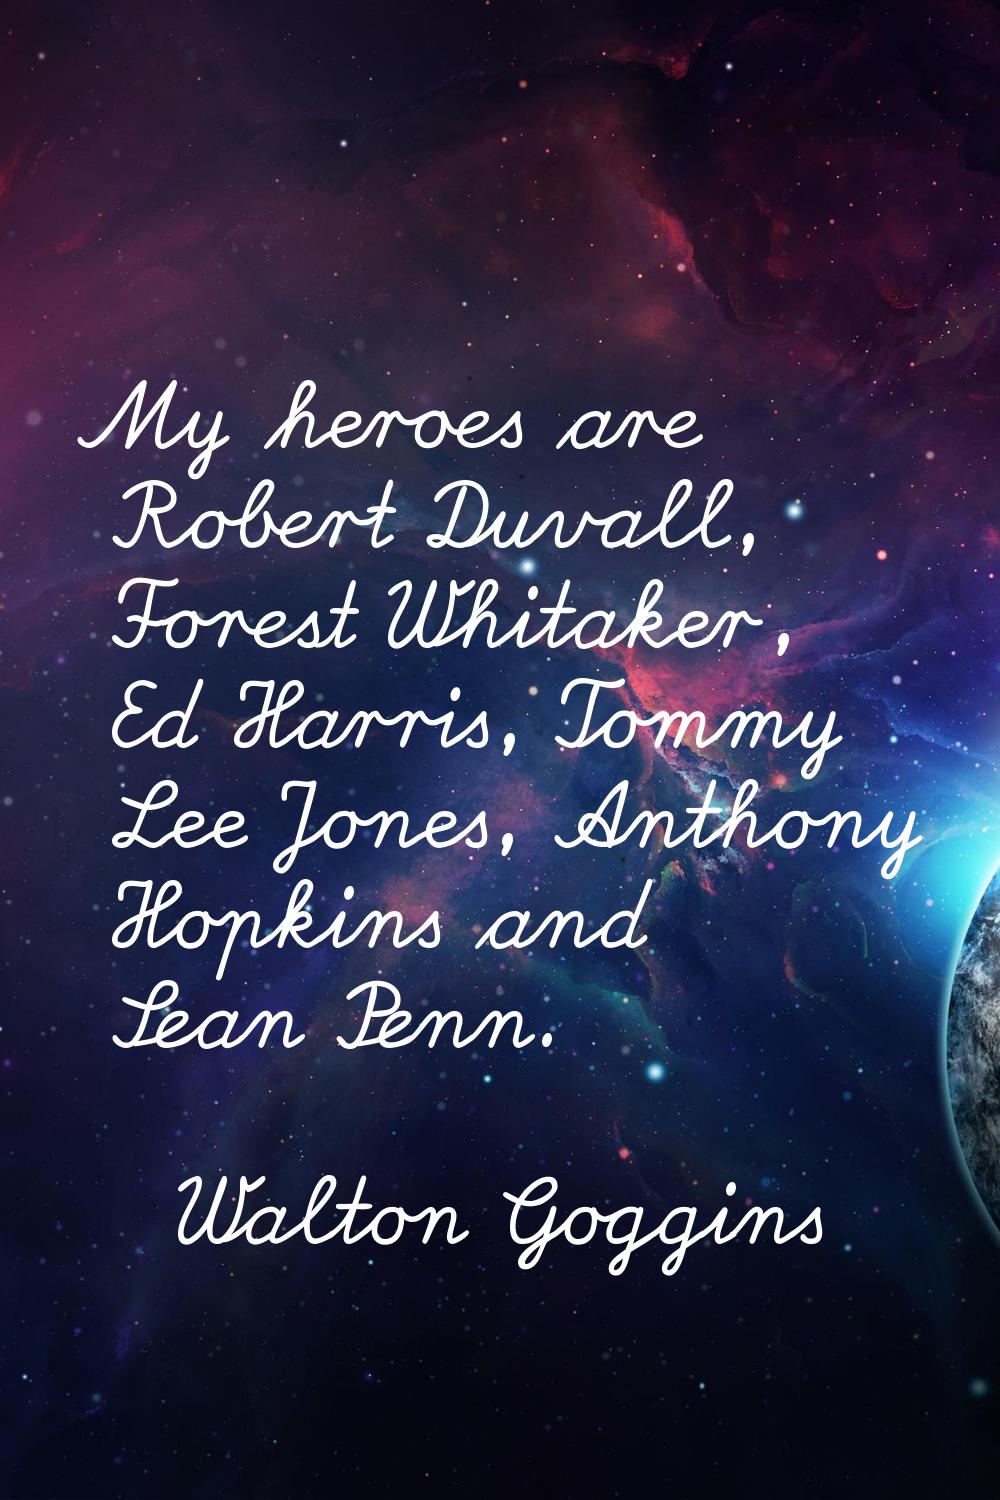 My heroes are Robert Duvall, Forest Whitaker, Ed Harris, Tommy Lee Jones, Anthony Hopkins and Sean 